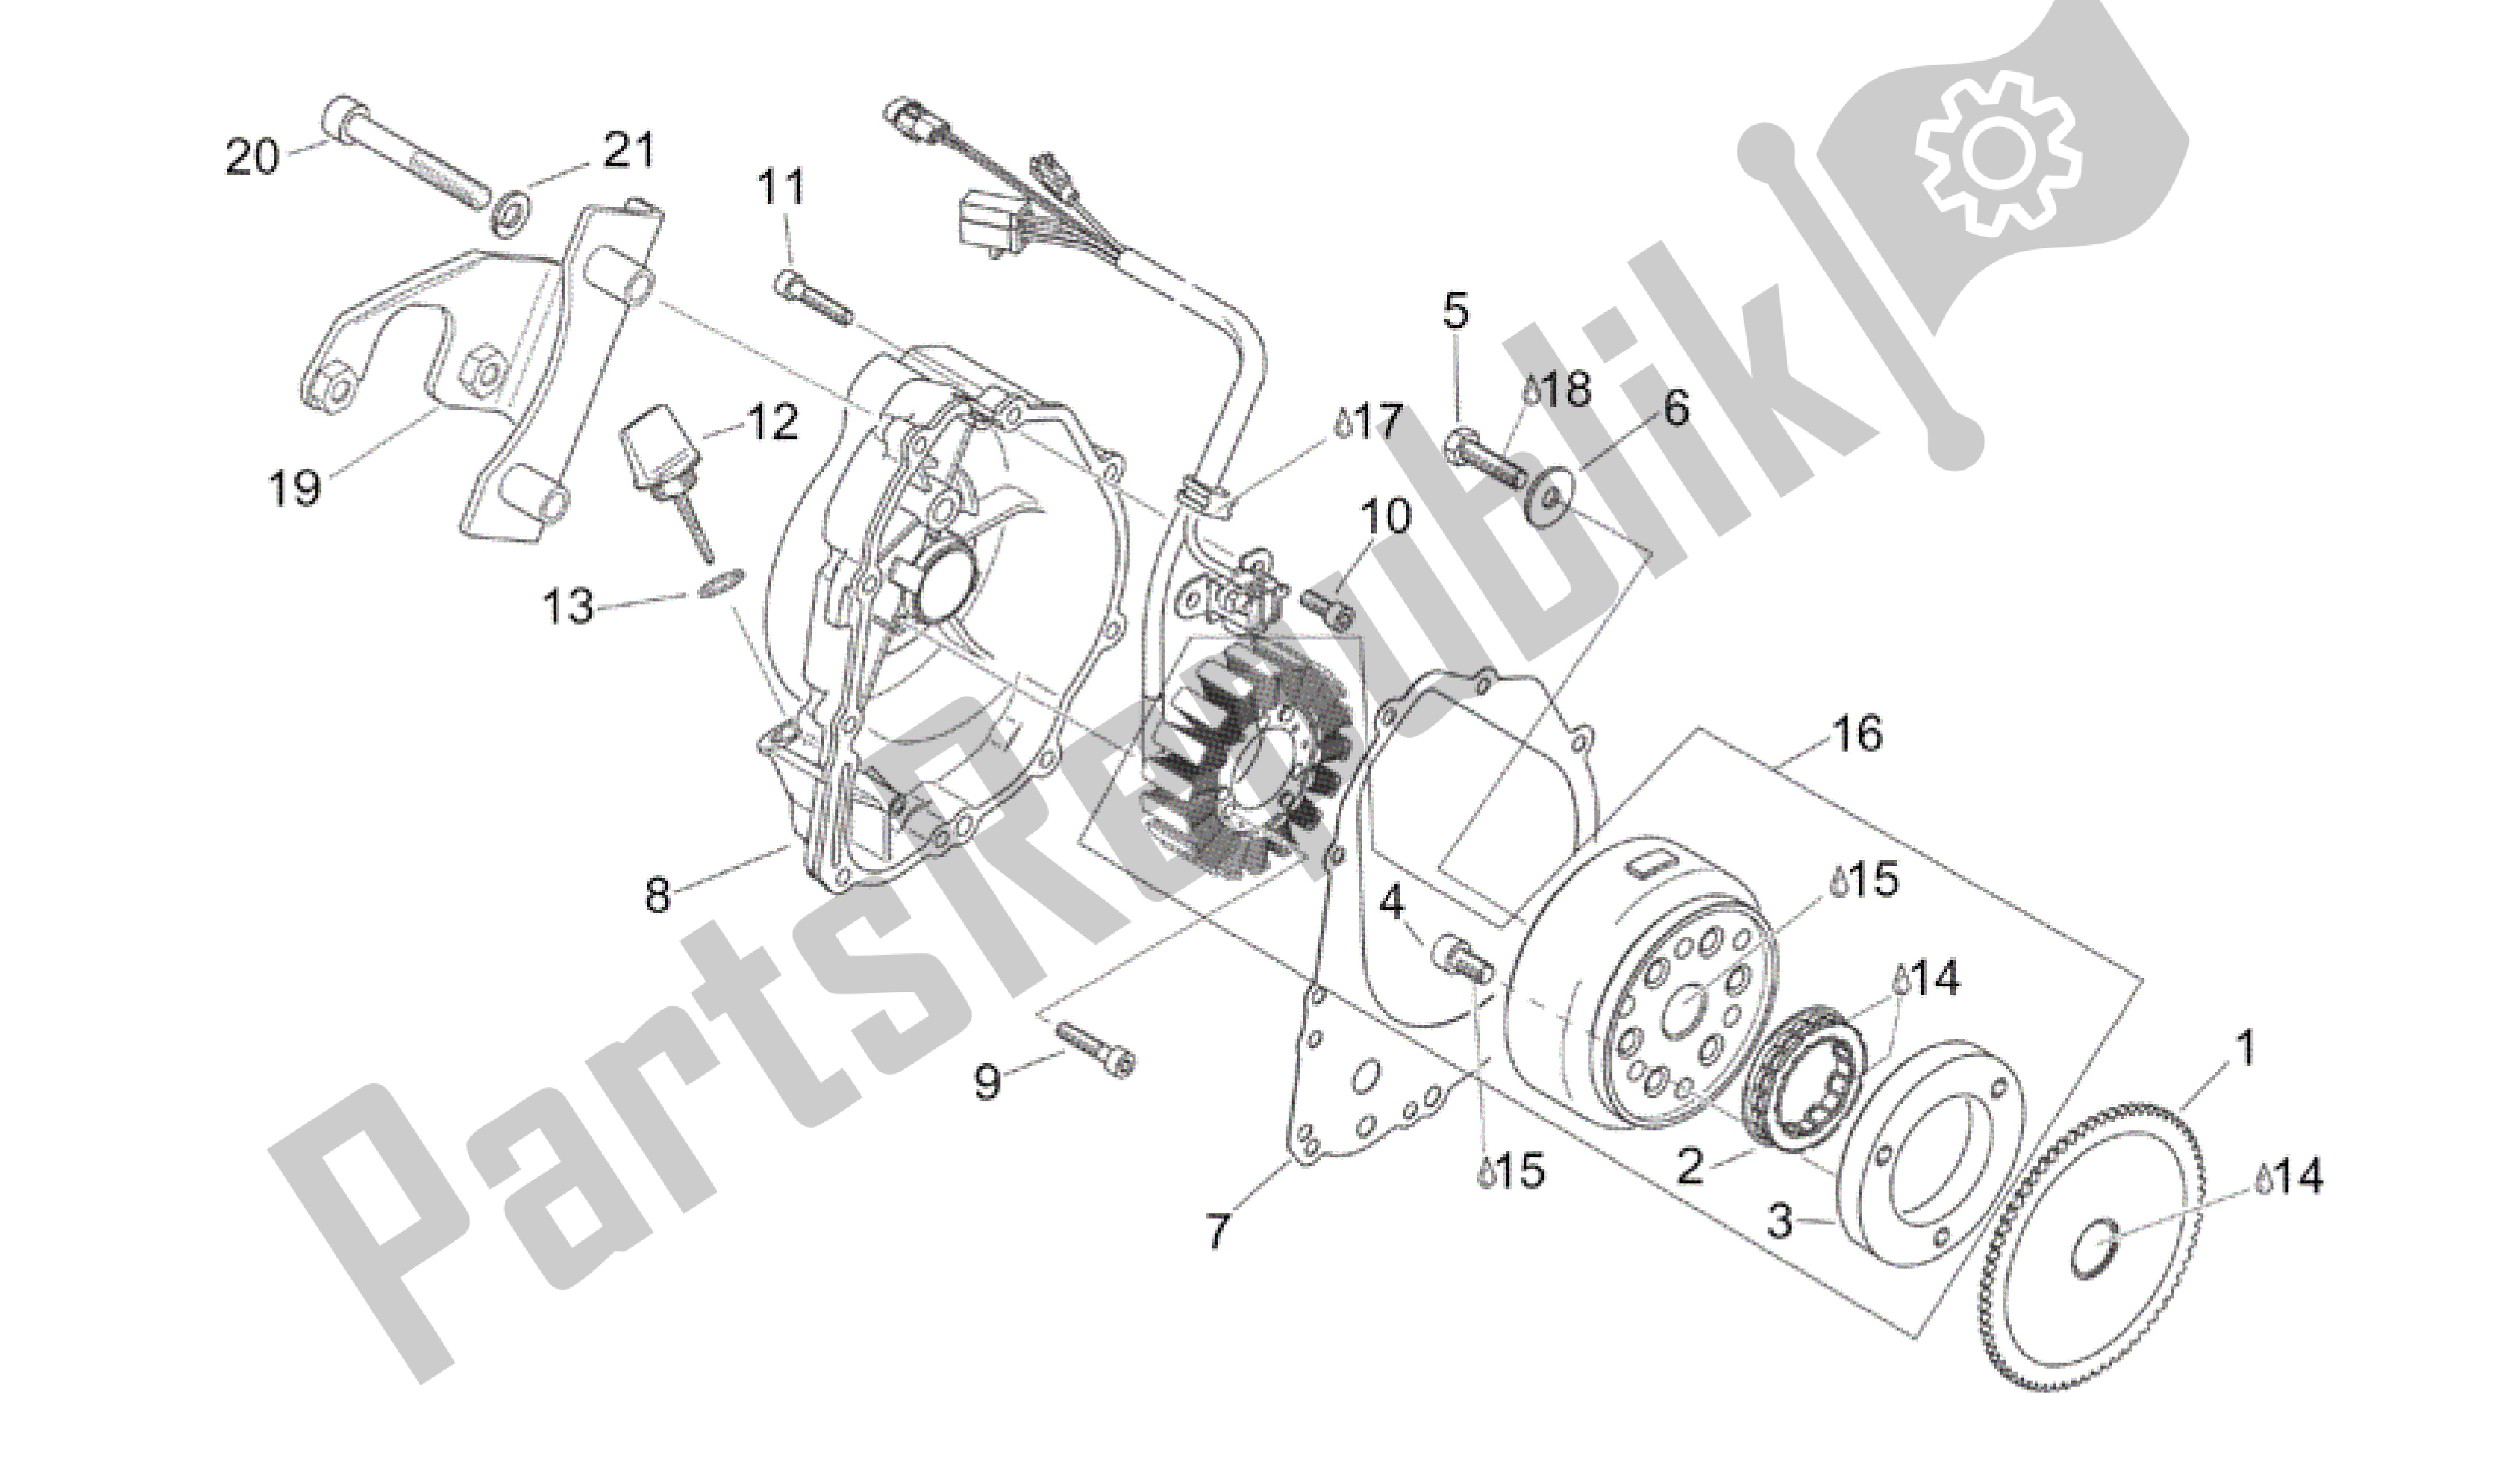 All parts for the Ignition Unit of the Aprilia Scarabeo 150 1999 - 2004